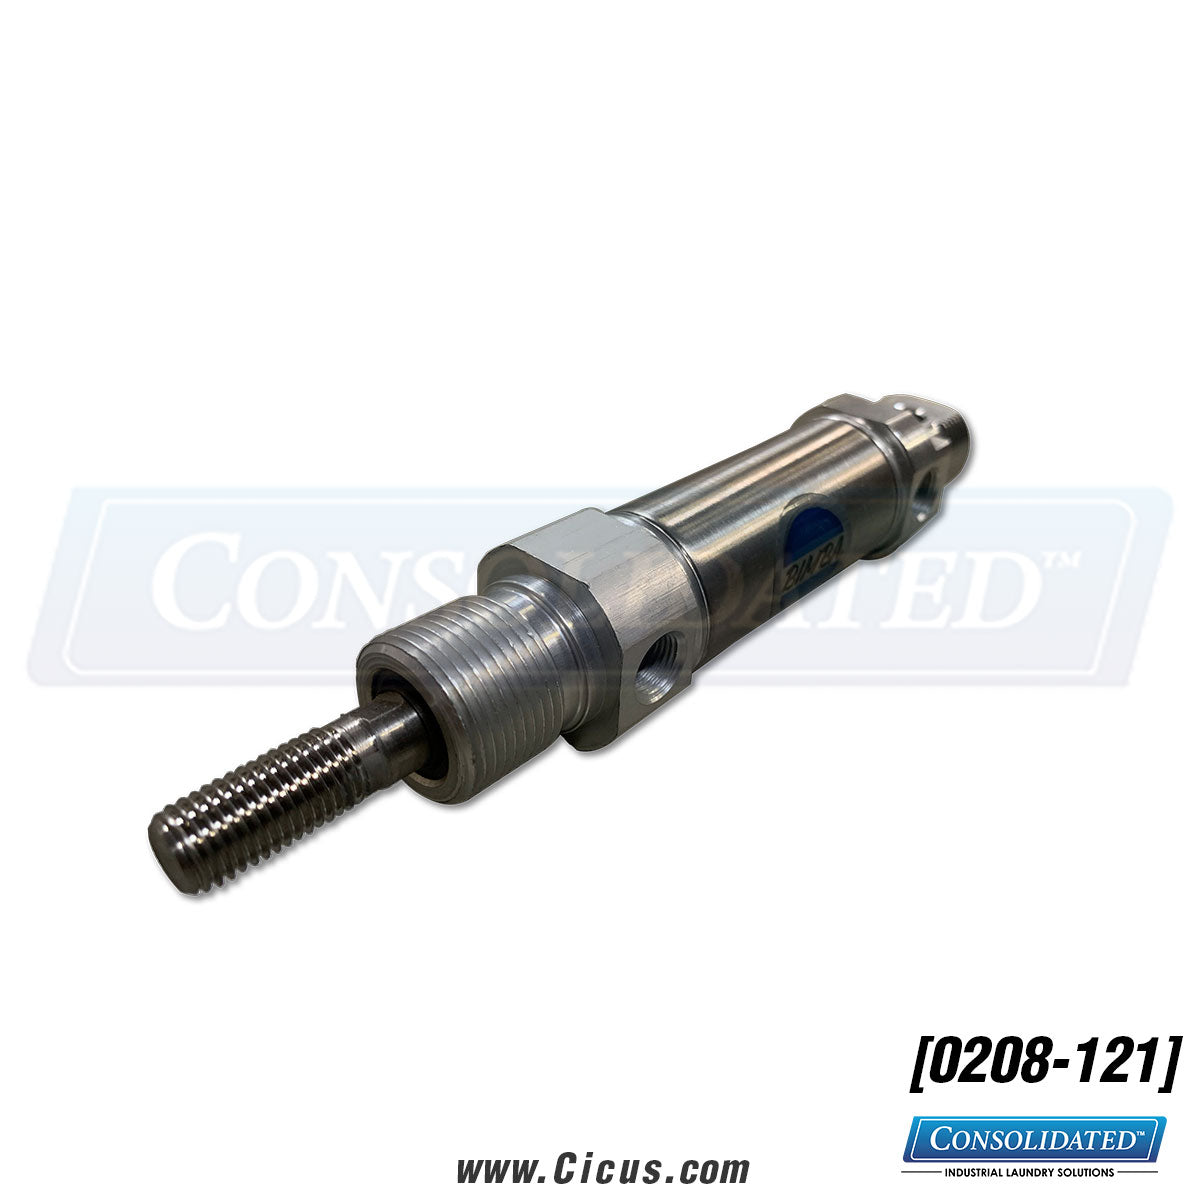 Chicago Dryer Air Cylinder 25mm Bore x 20mm Stroke [0208-121]